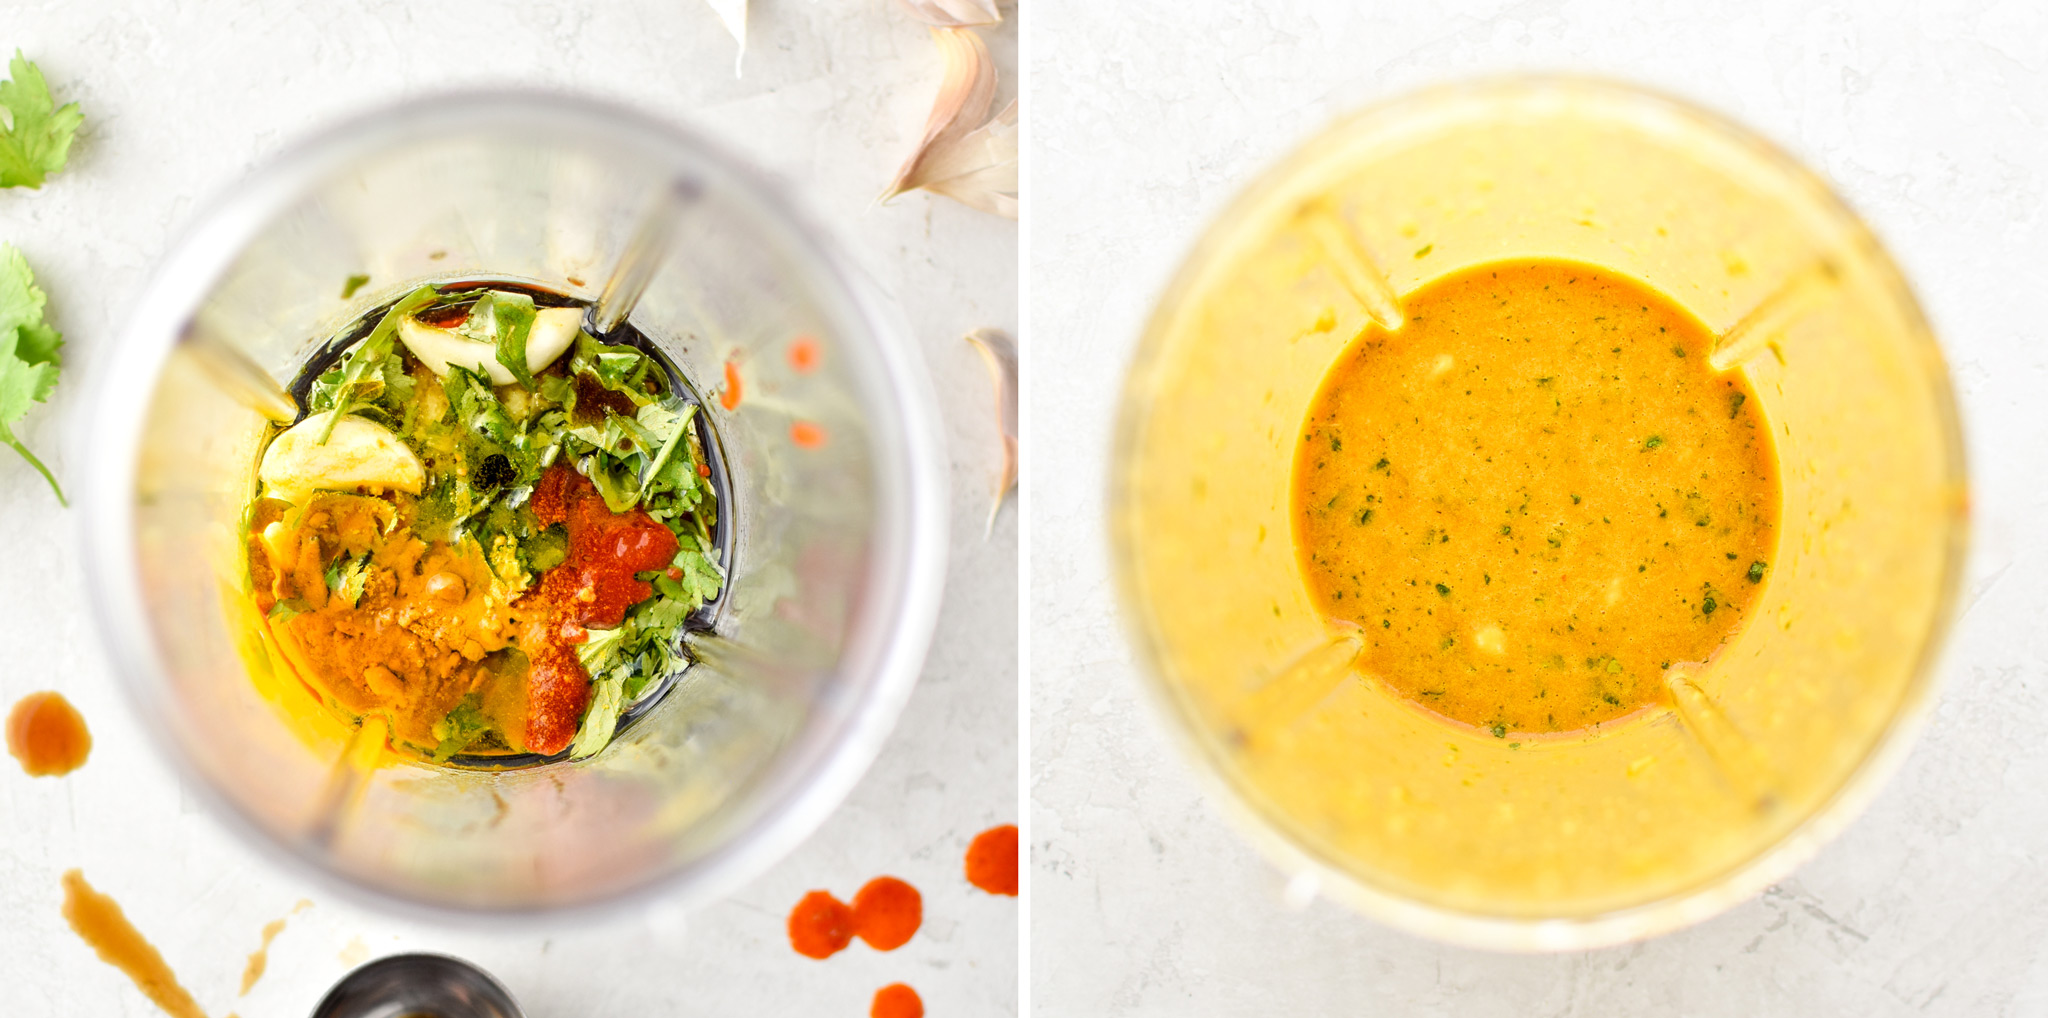 Before and after blending sauce for the Meal Prep Satay Inspired Thai Chicken Salad Bowls.